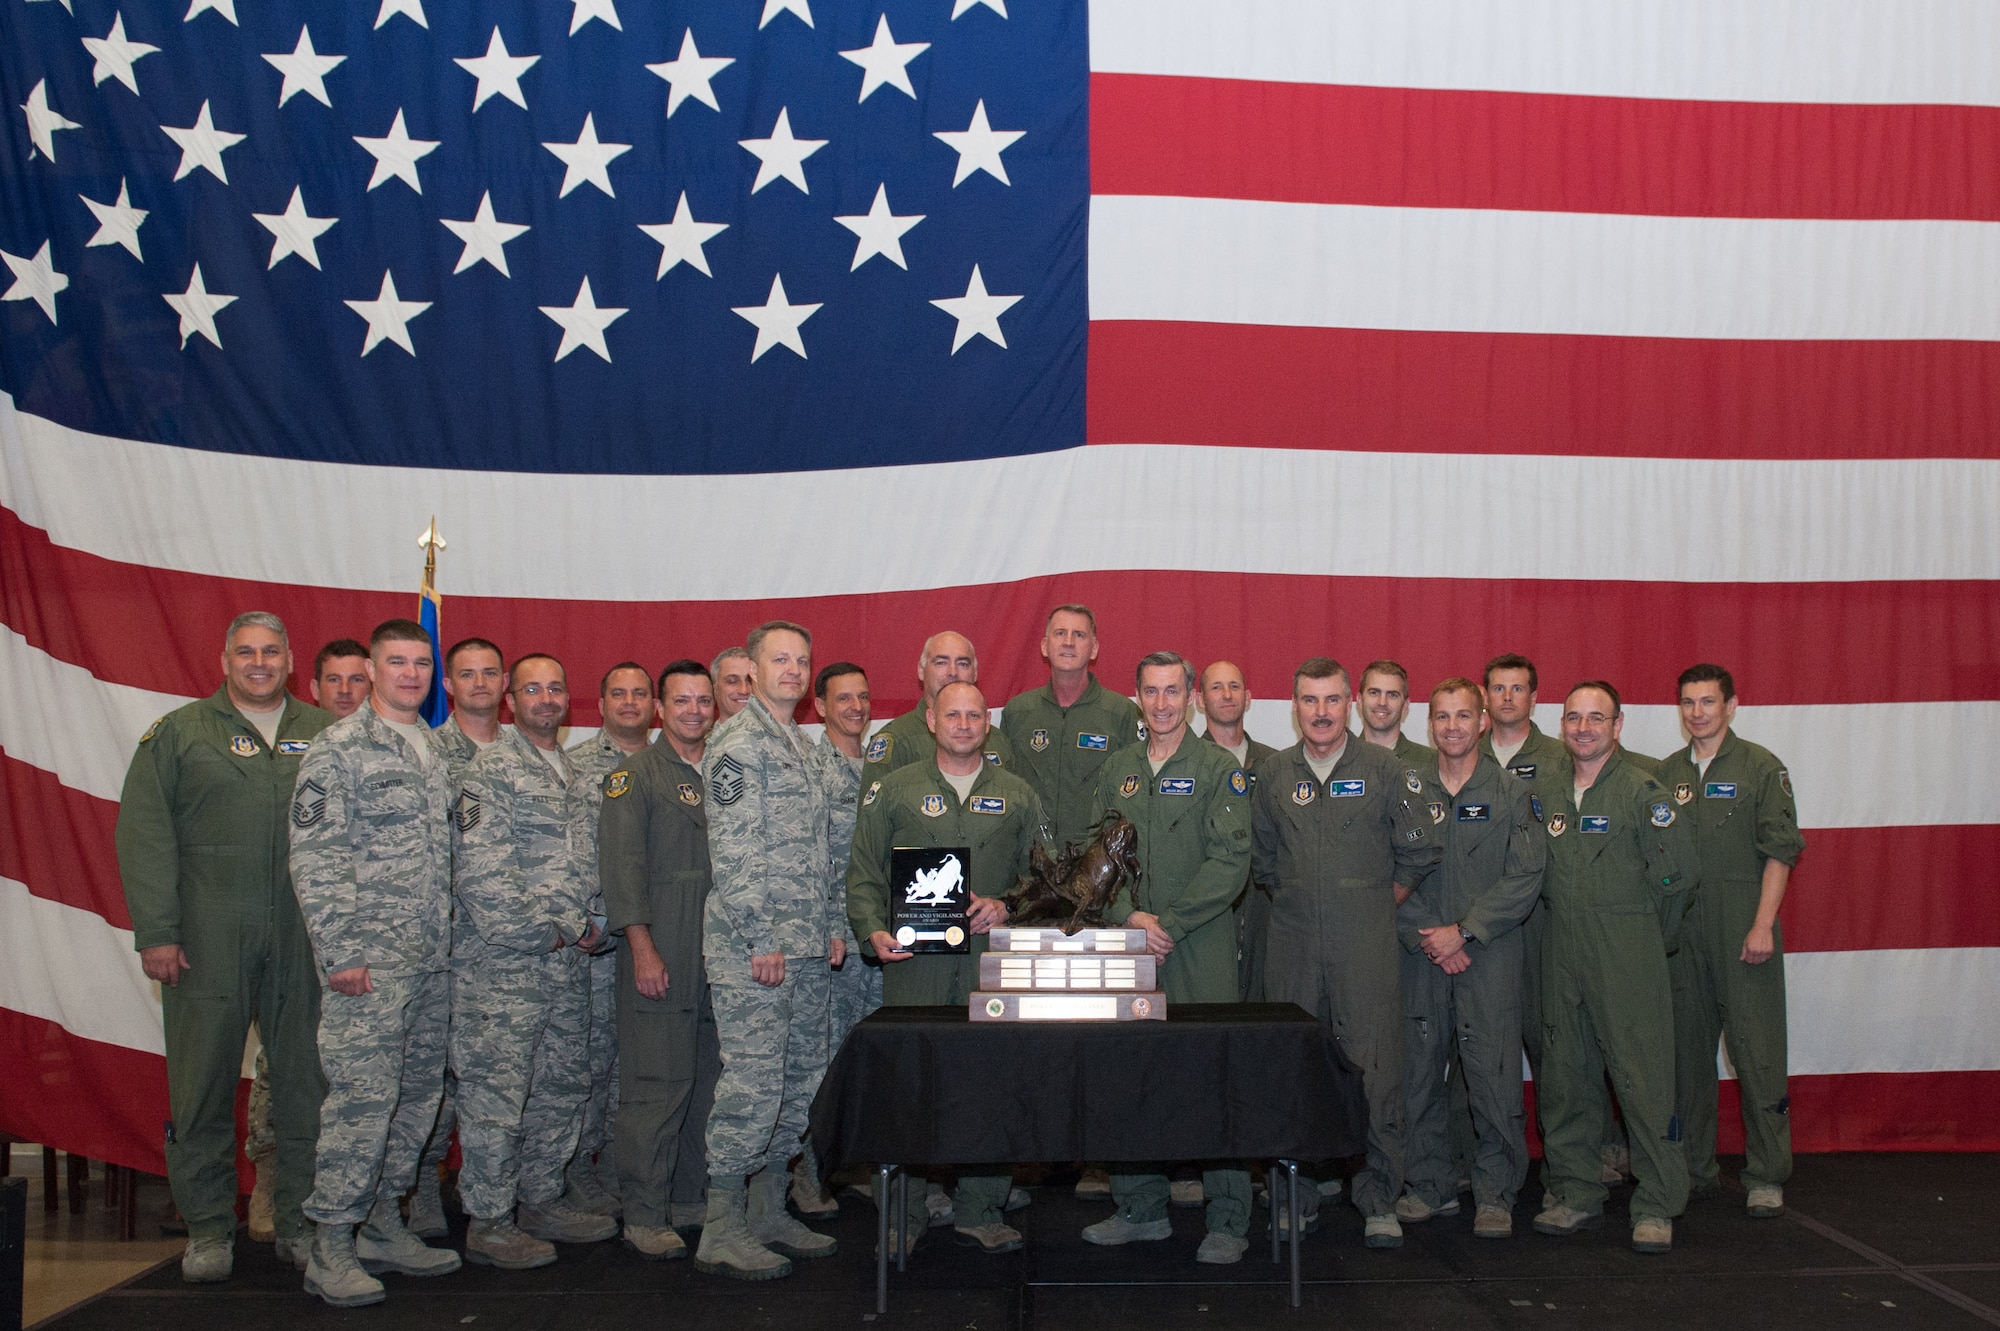 Maj. Gen. Ronald B. Miller, 10th Air Force Commander, poses with members of the 920th Rescue Wing after presenting them with the Power and Vigilance award.